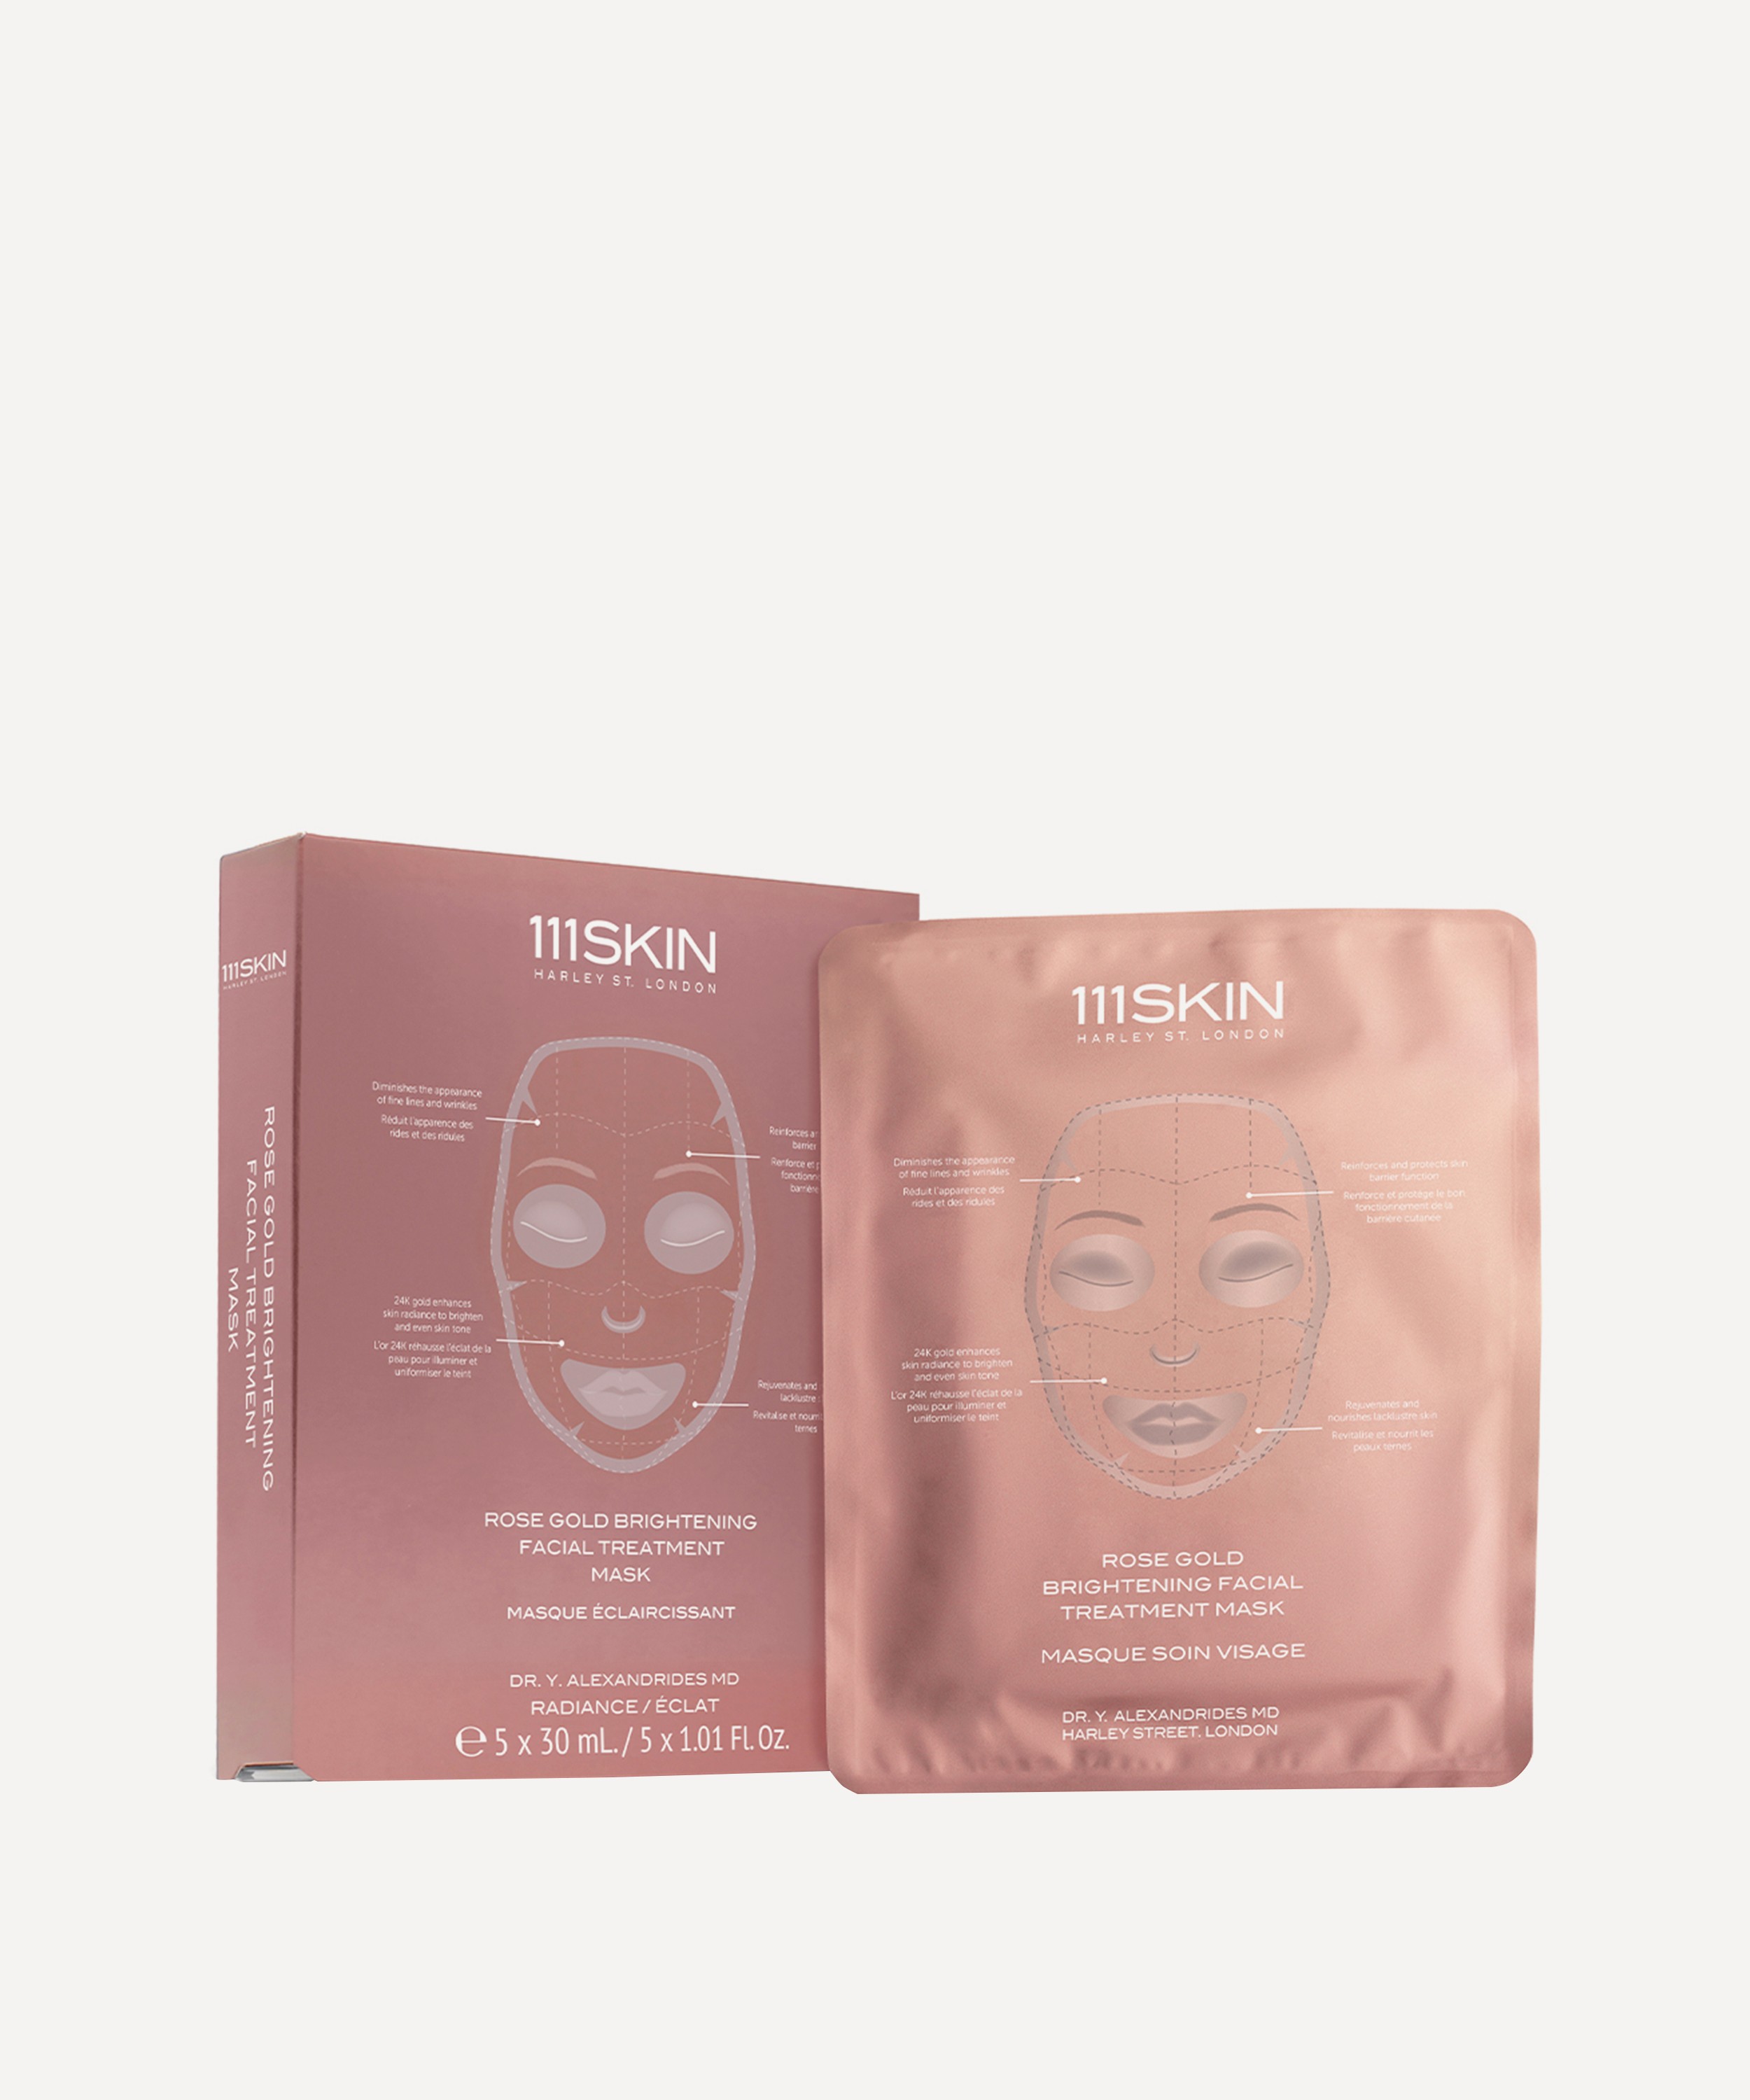 111SKIN - Rose Gold Brightening Facial Treatment Mask 5 x 30ml image number 0